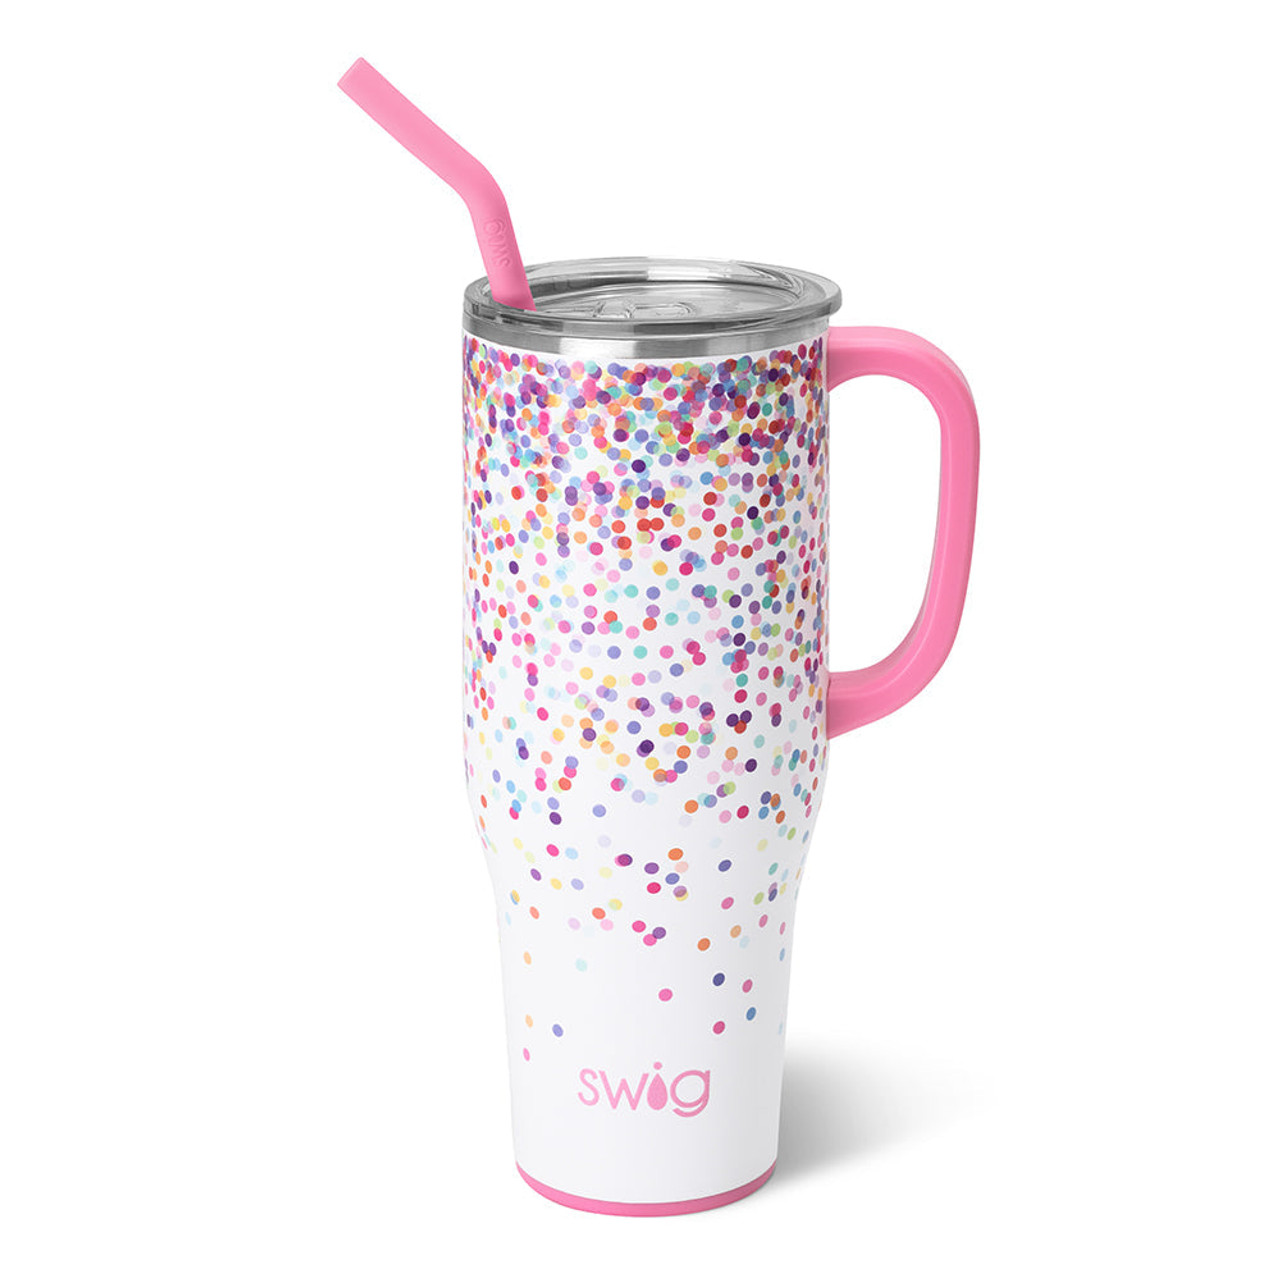 https://cdn11.bigcommerce.com/s-yhl8wqmxu2/images/stencil/1280x1280/products/83852/48077/swig-life-signature-40oz-insulated-stainless-steel-mega-mug-with-handle-confetti-main__12047.1679272049.jpg?c=2